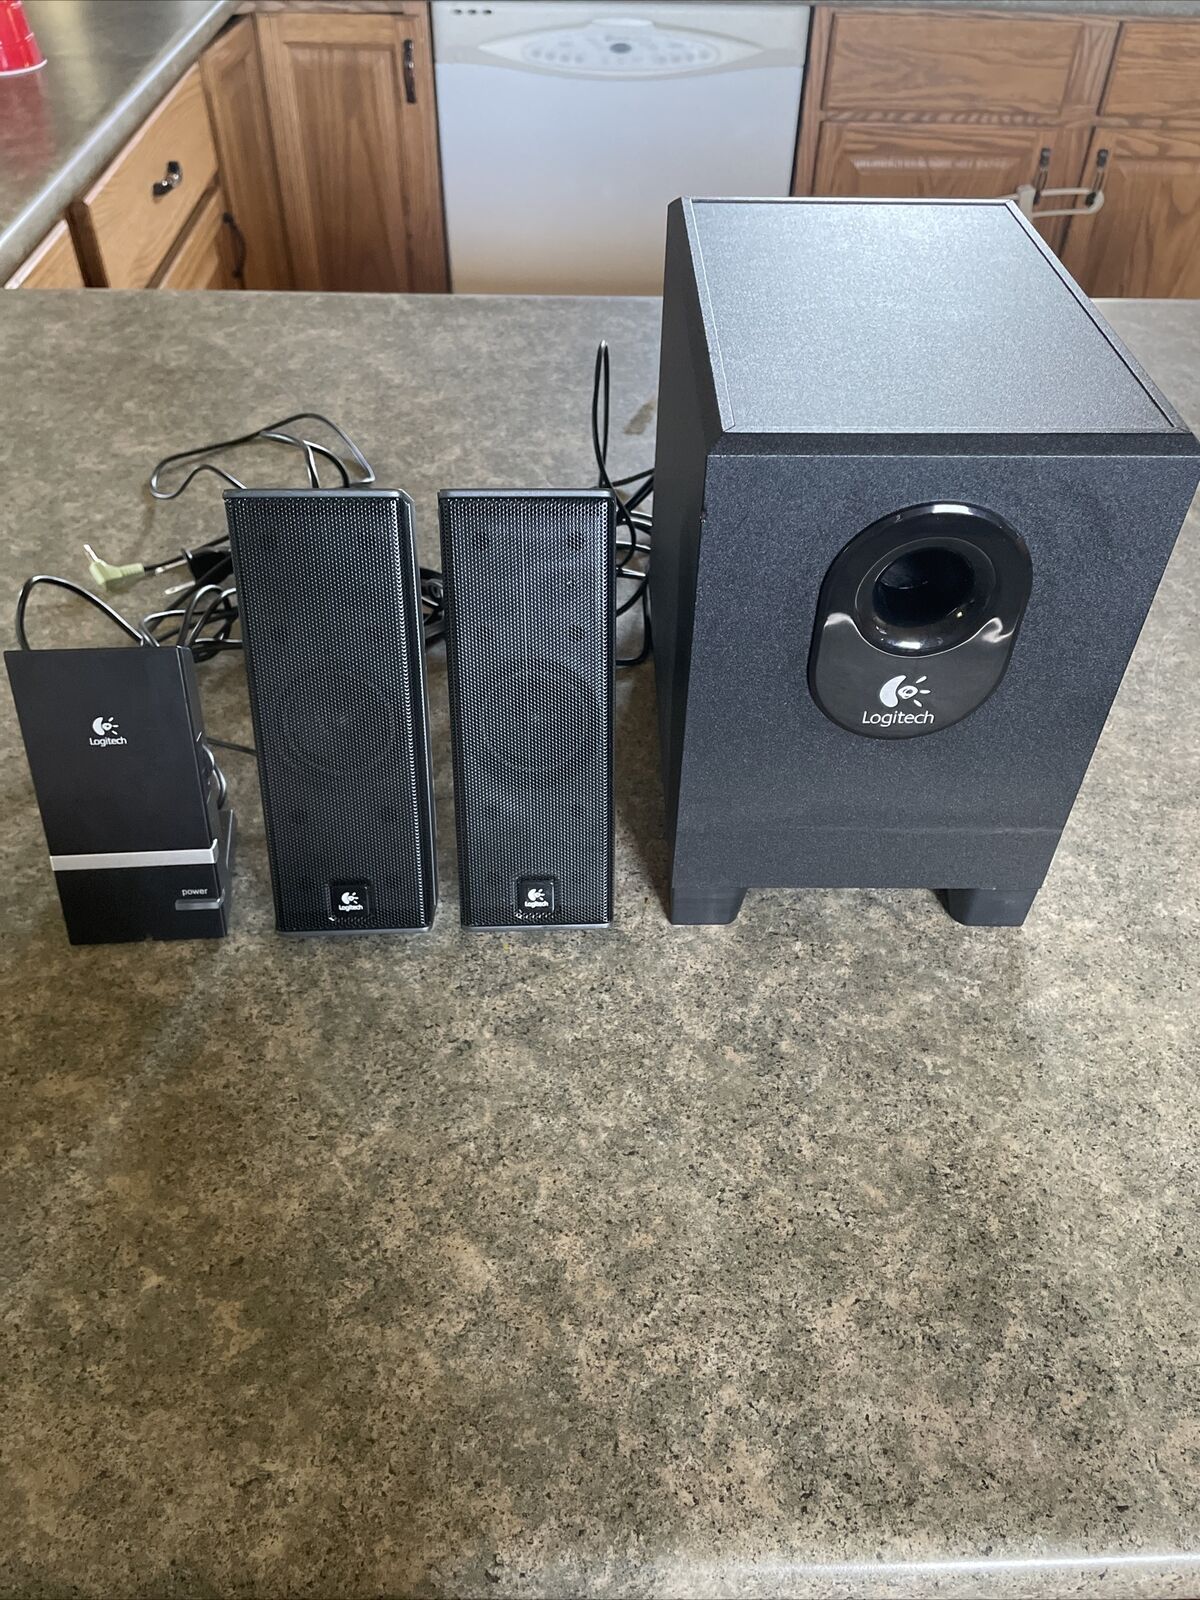 Logitech X -240 Computer 4 Piece Speaker System with Subwoofer Tested